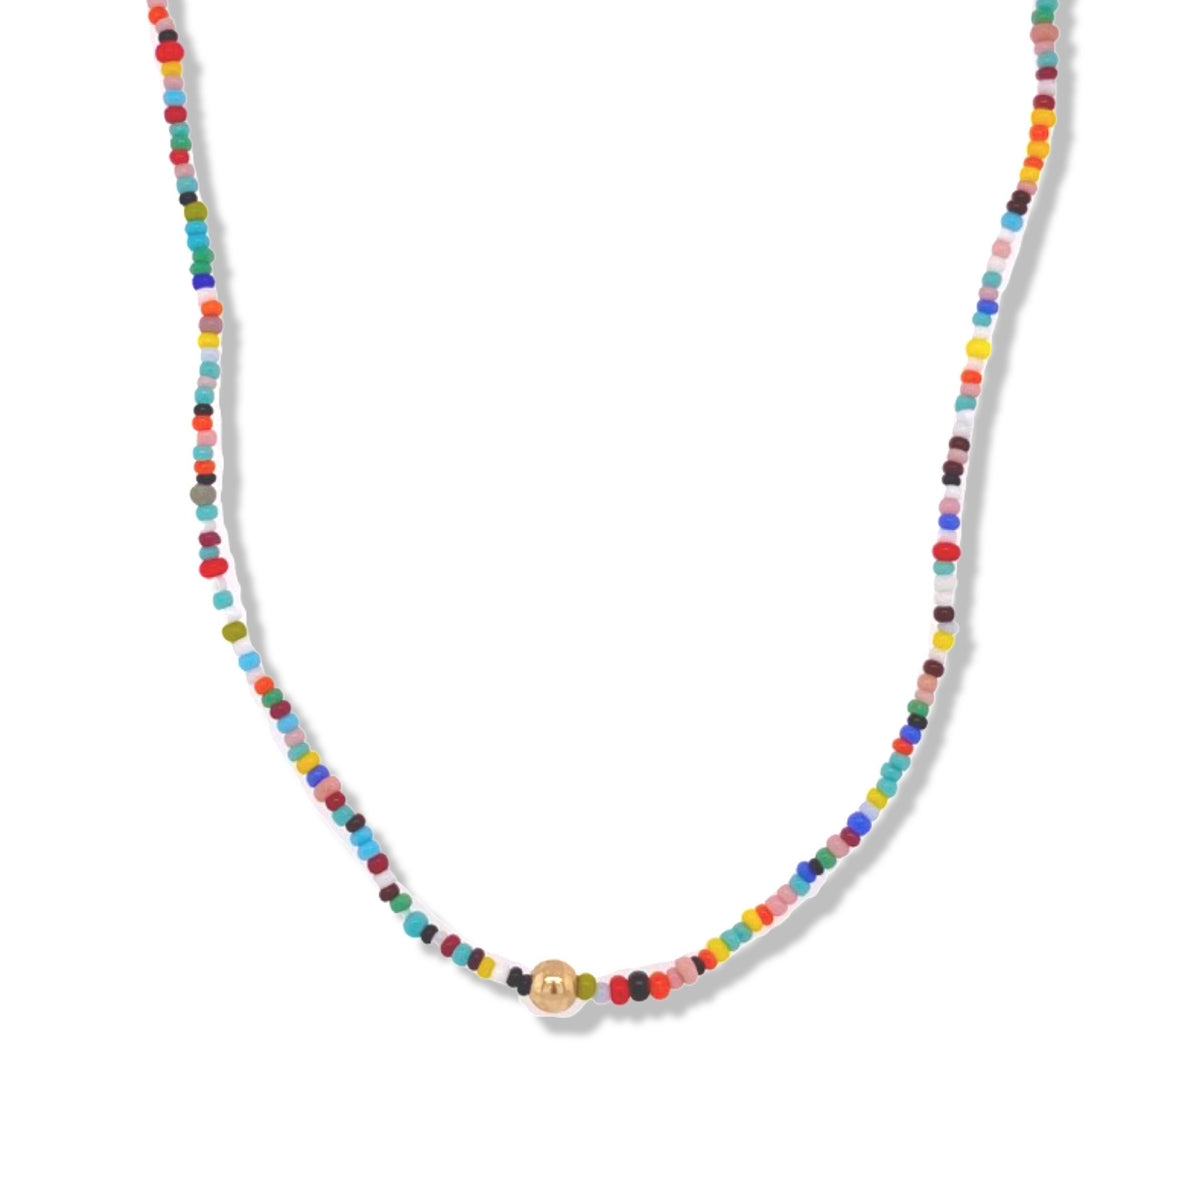 Multi color Beaded Necklace | Keely Smith Jewelry |Nantucket